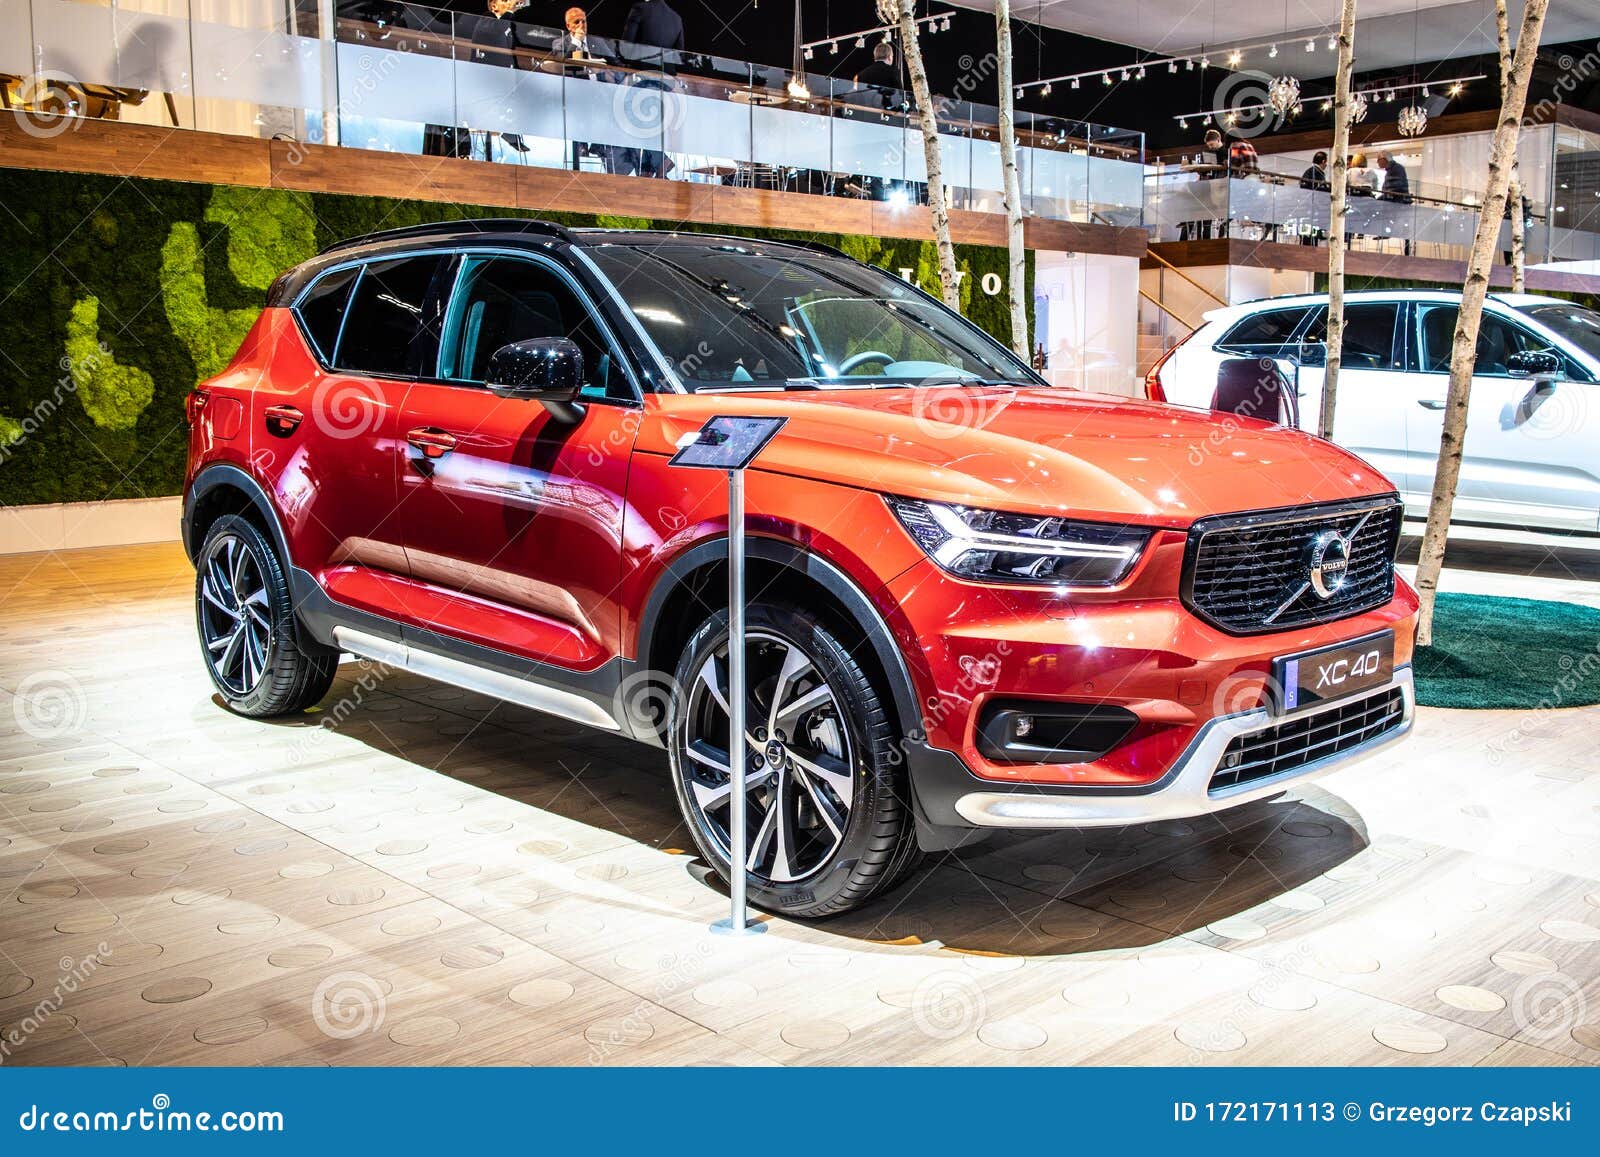 Volvo Xc40 At Brussels Motor Show Compact Crossover Suv Manufactured And Marketed By Volvo Cars Editorial Stock Photo Image Of Belgium Motorshow 172171113